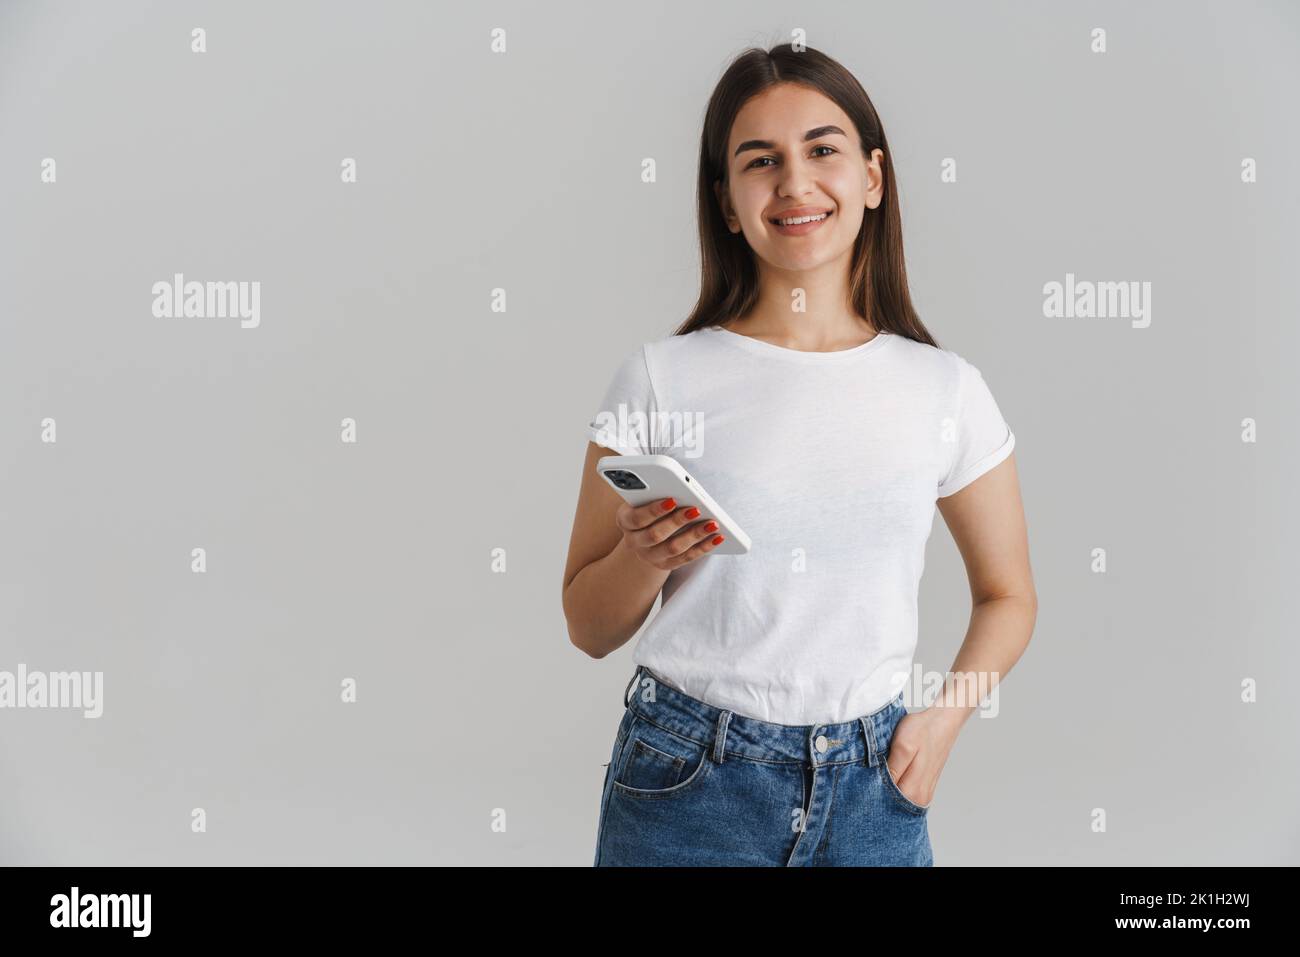 Portrait of a young happy casual white woman in t-shirt with long brunette hair standing over gray wall background Stock Photo